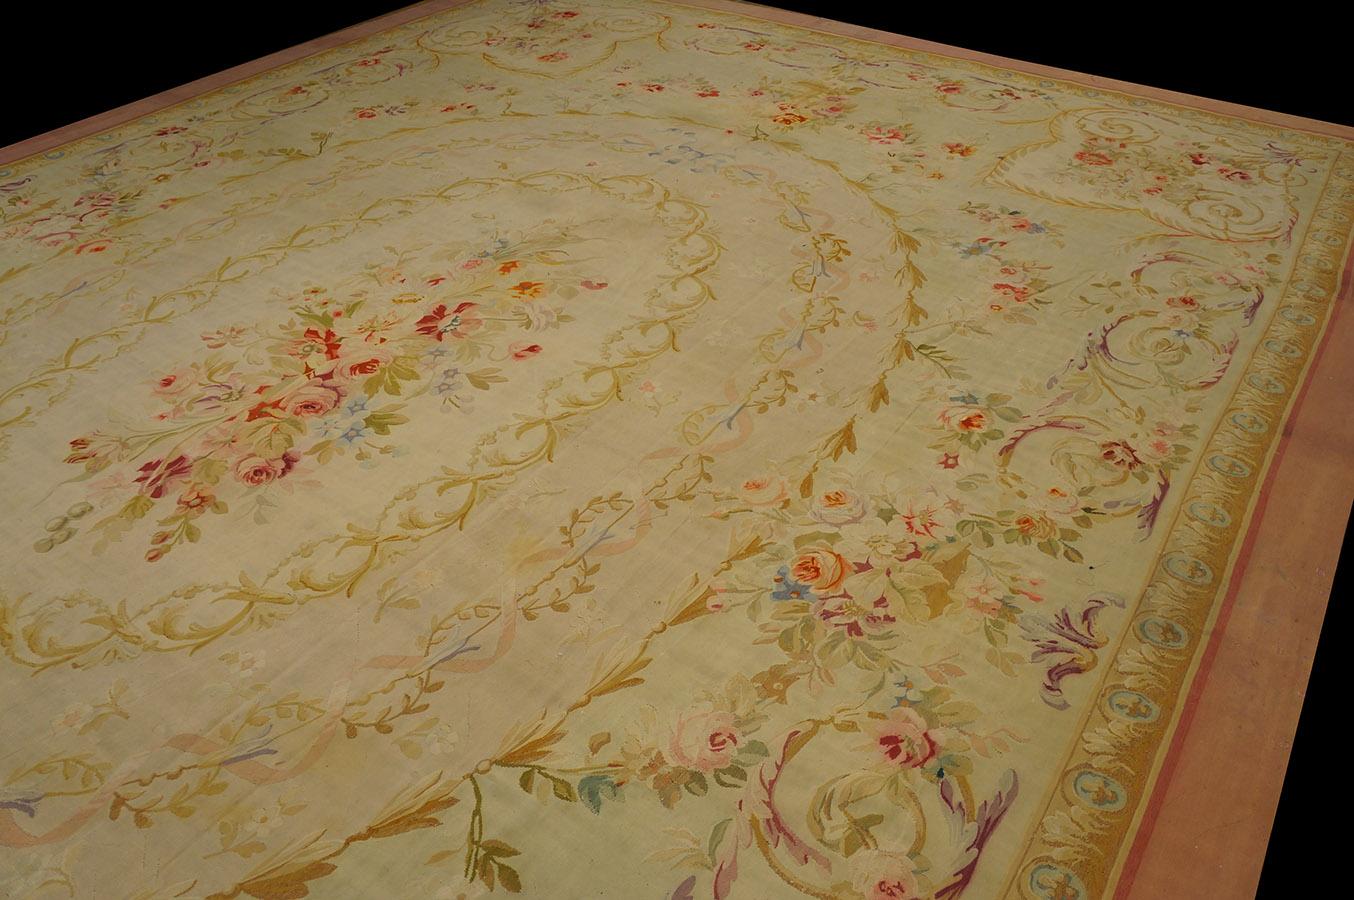 Wool Early 20th Century French Aubusson Carpet ( 14'5' x 20'9'' - 440 x 633 )